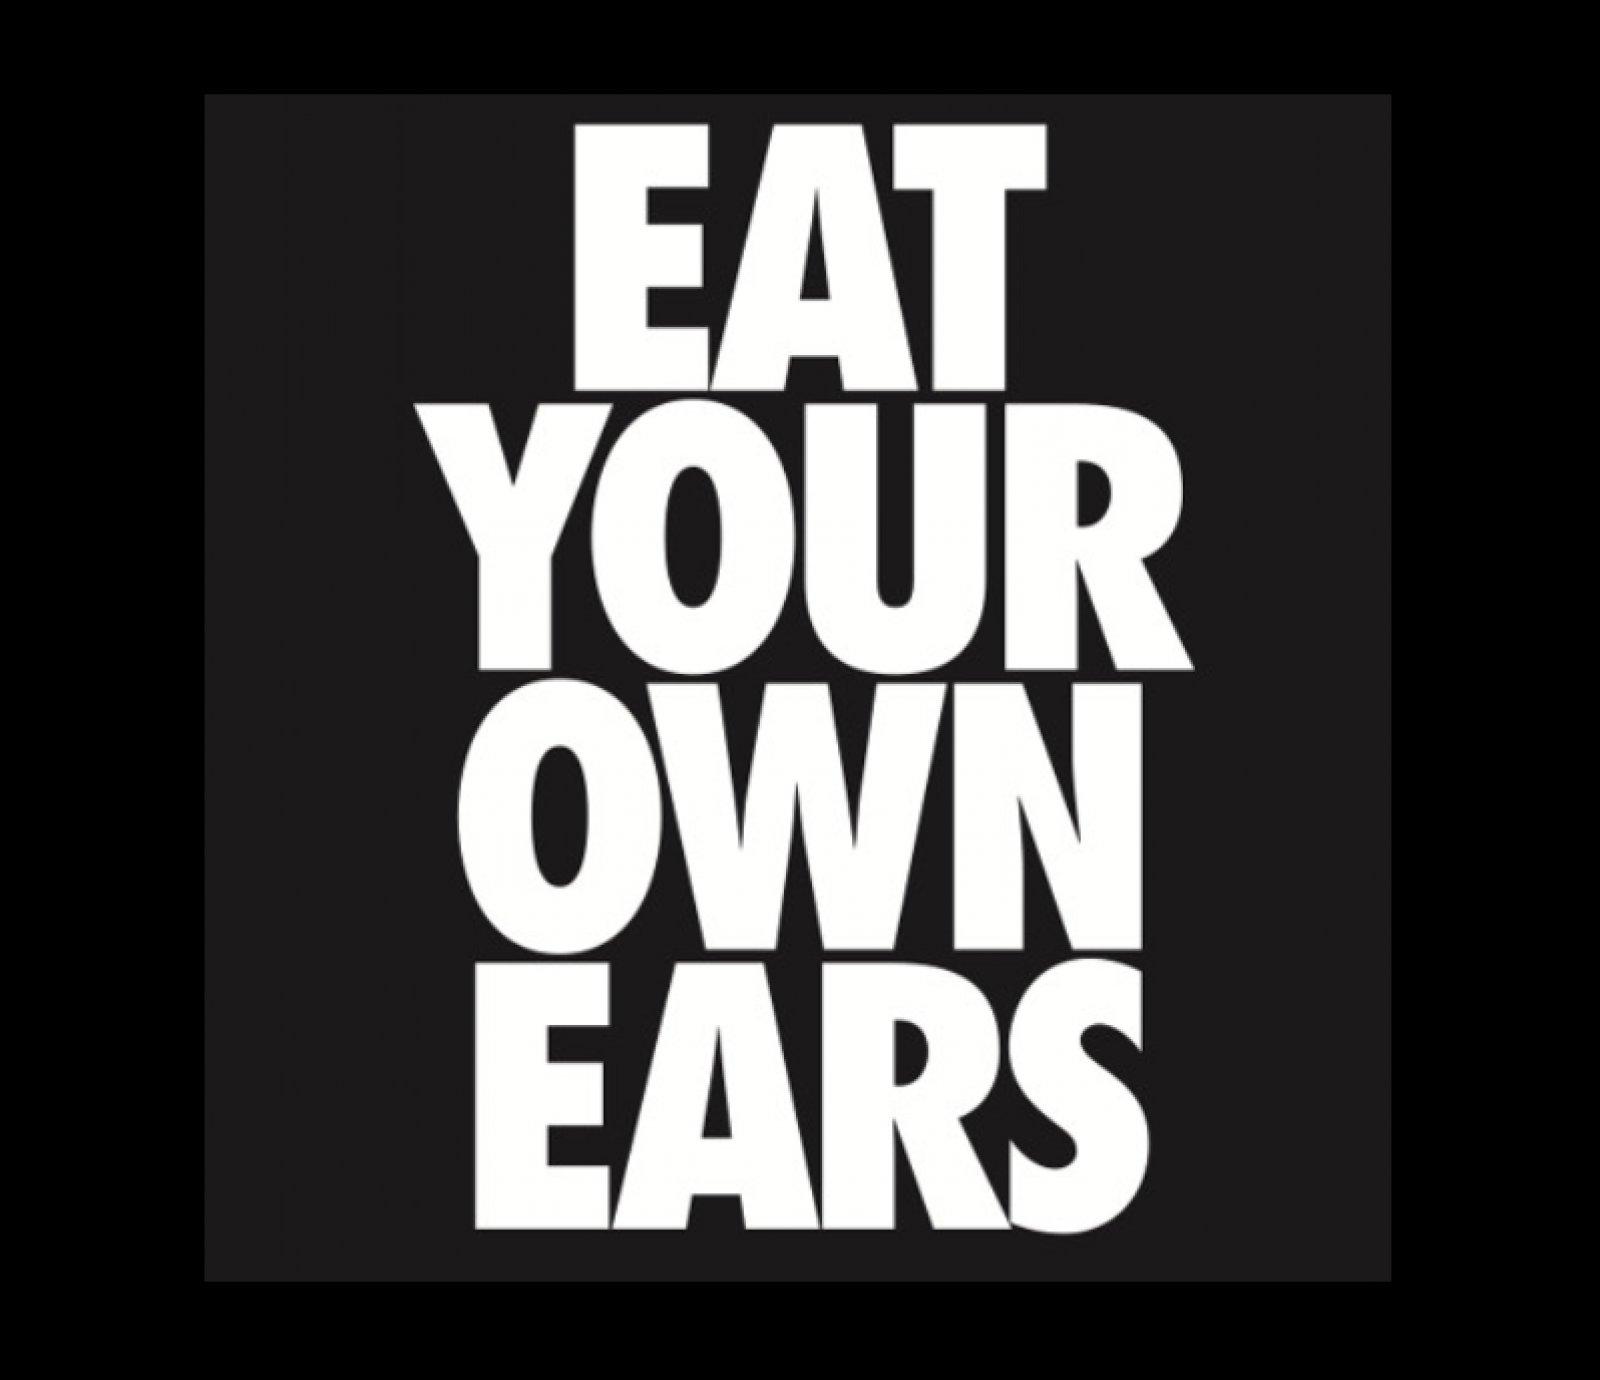 Eat Your Own Ears